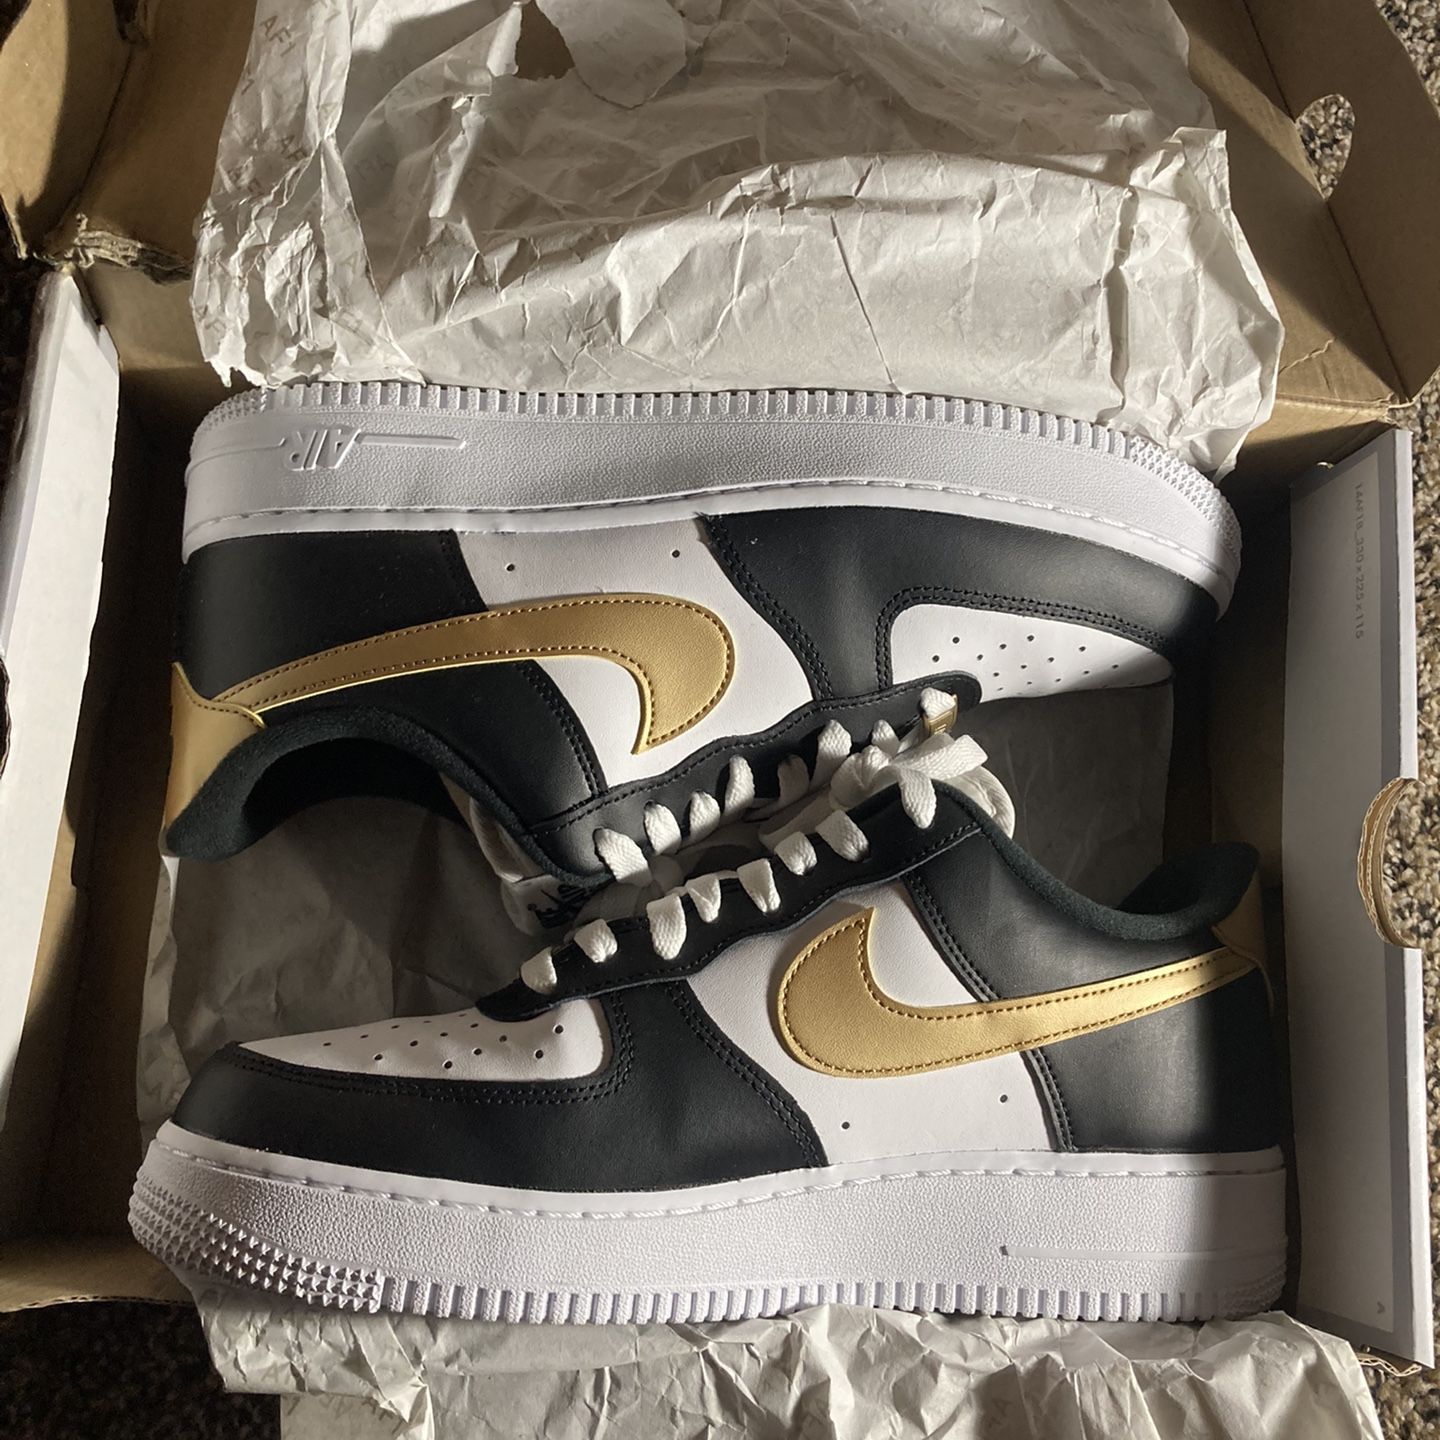 Black Air Force One for Sale in Salisbury, NC - OfferUp